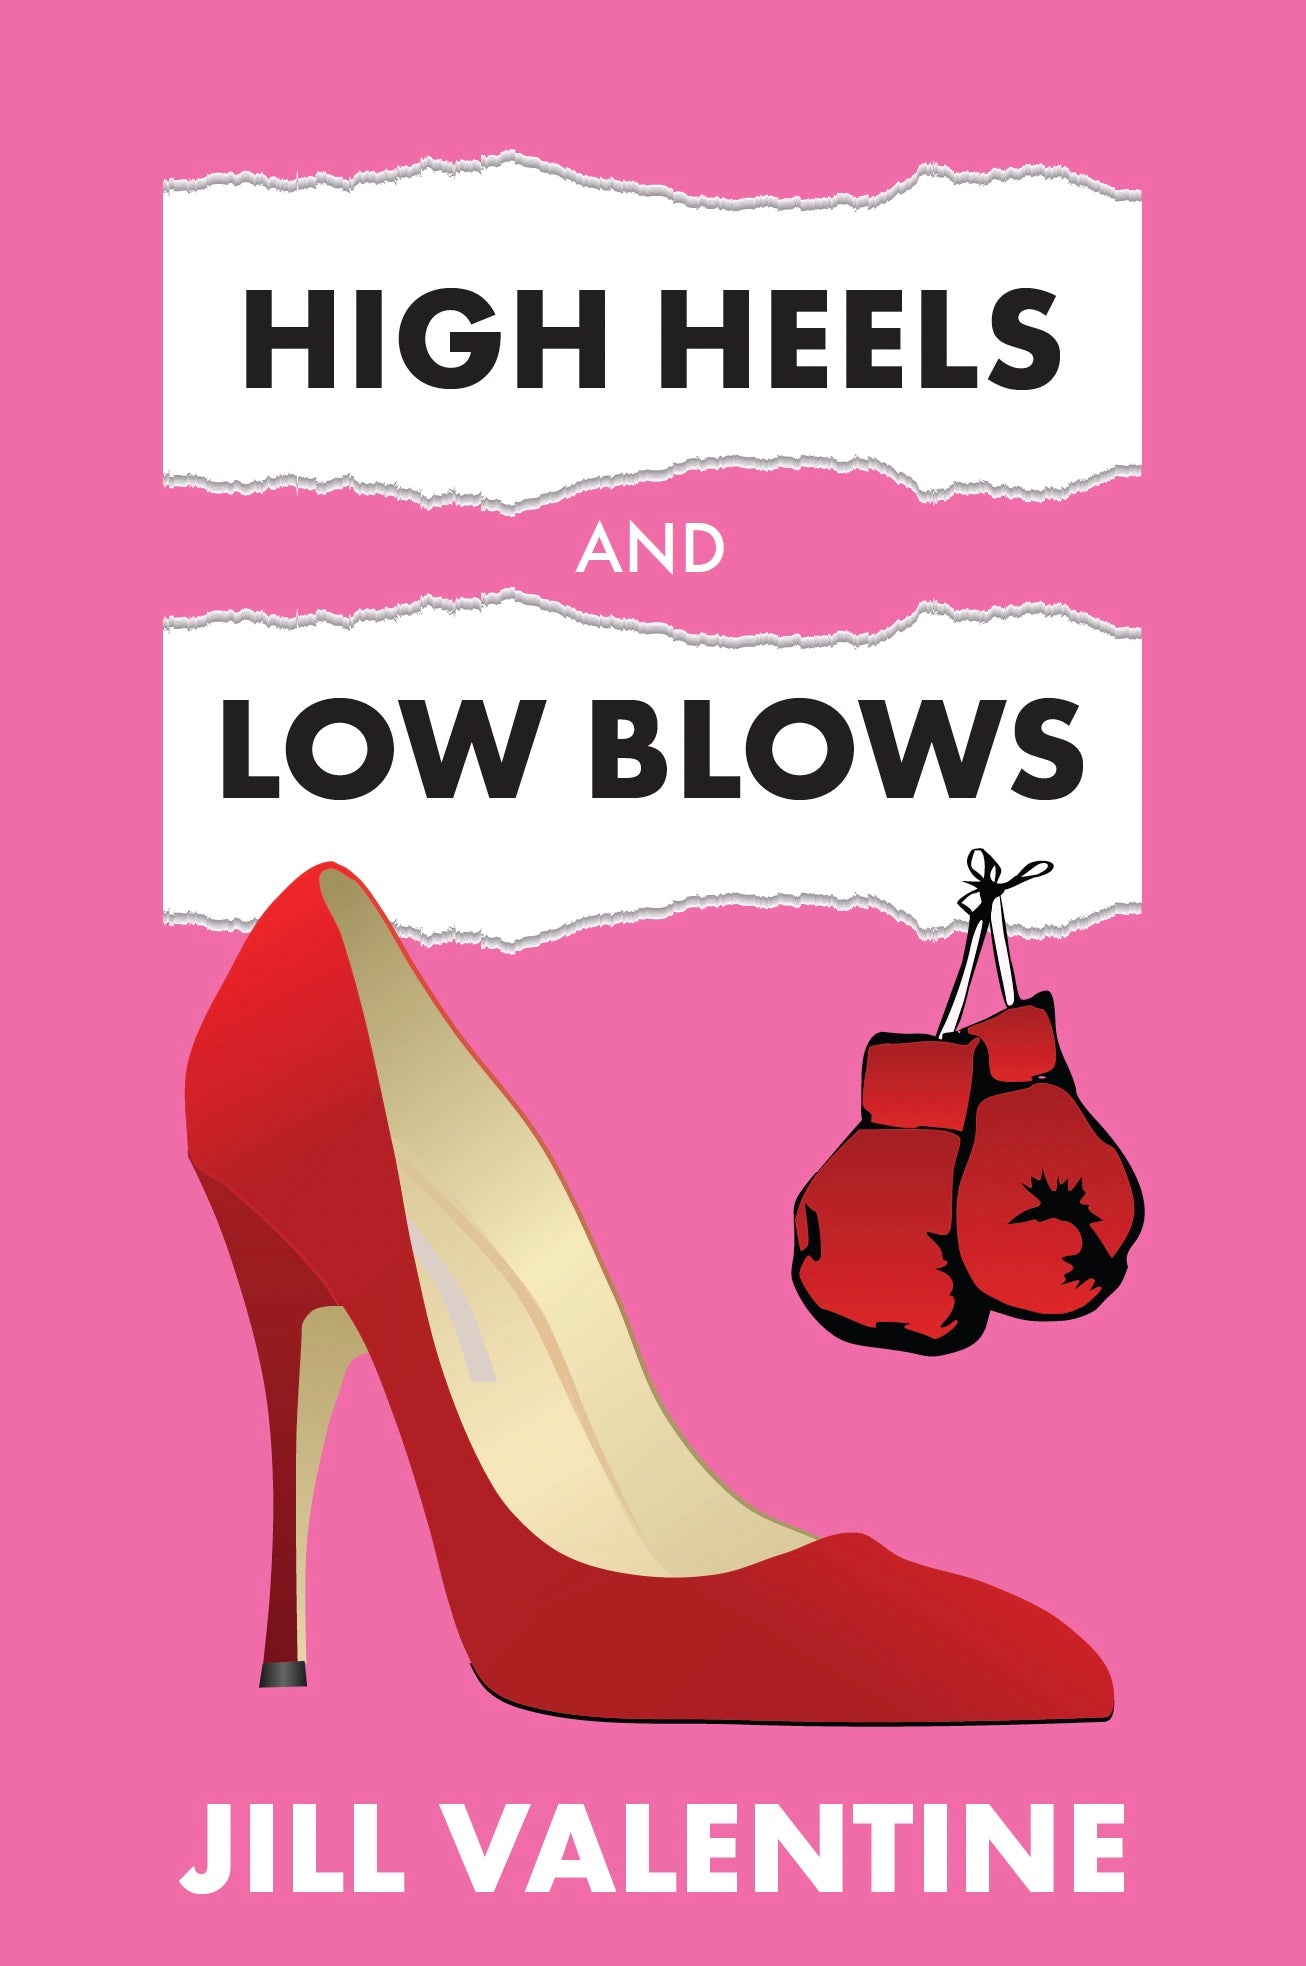 High Heels and Low Blows